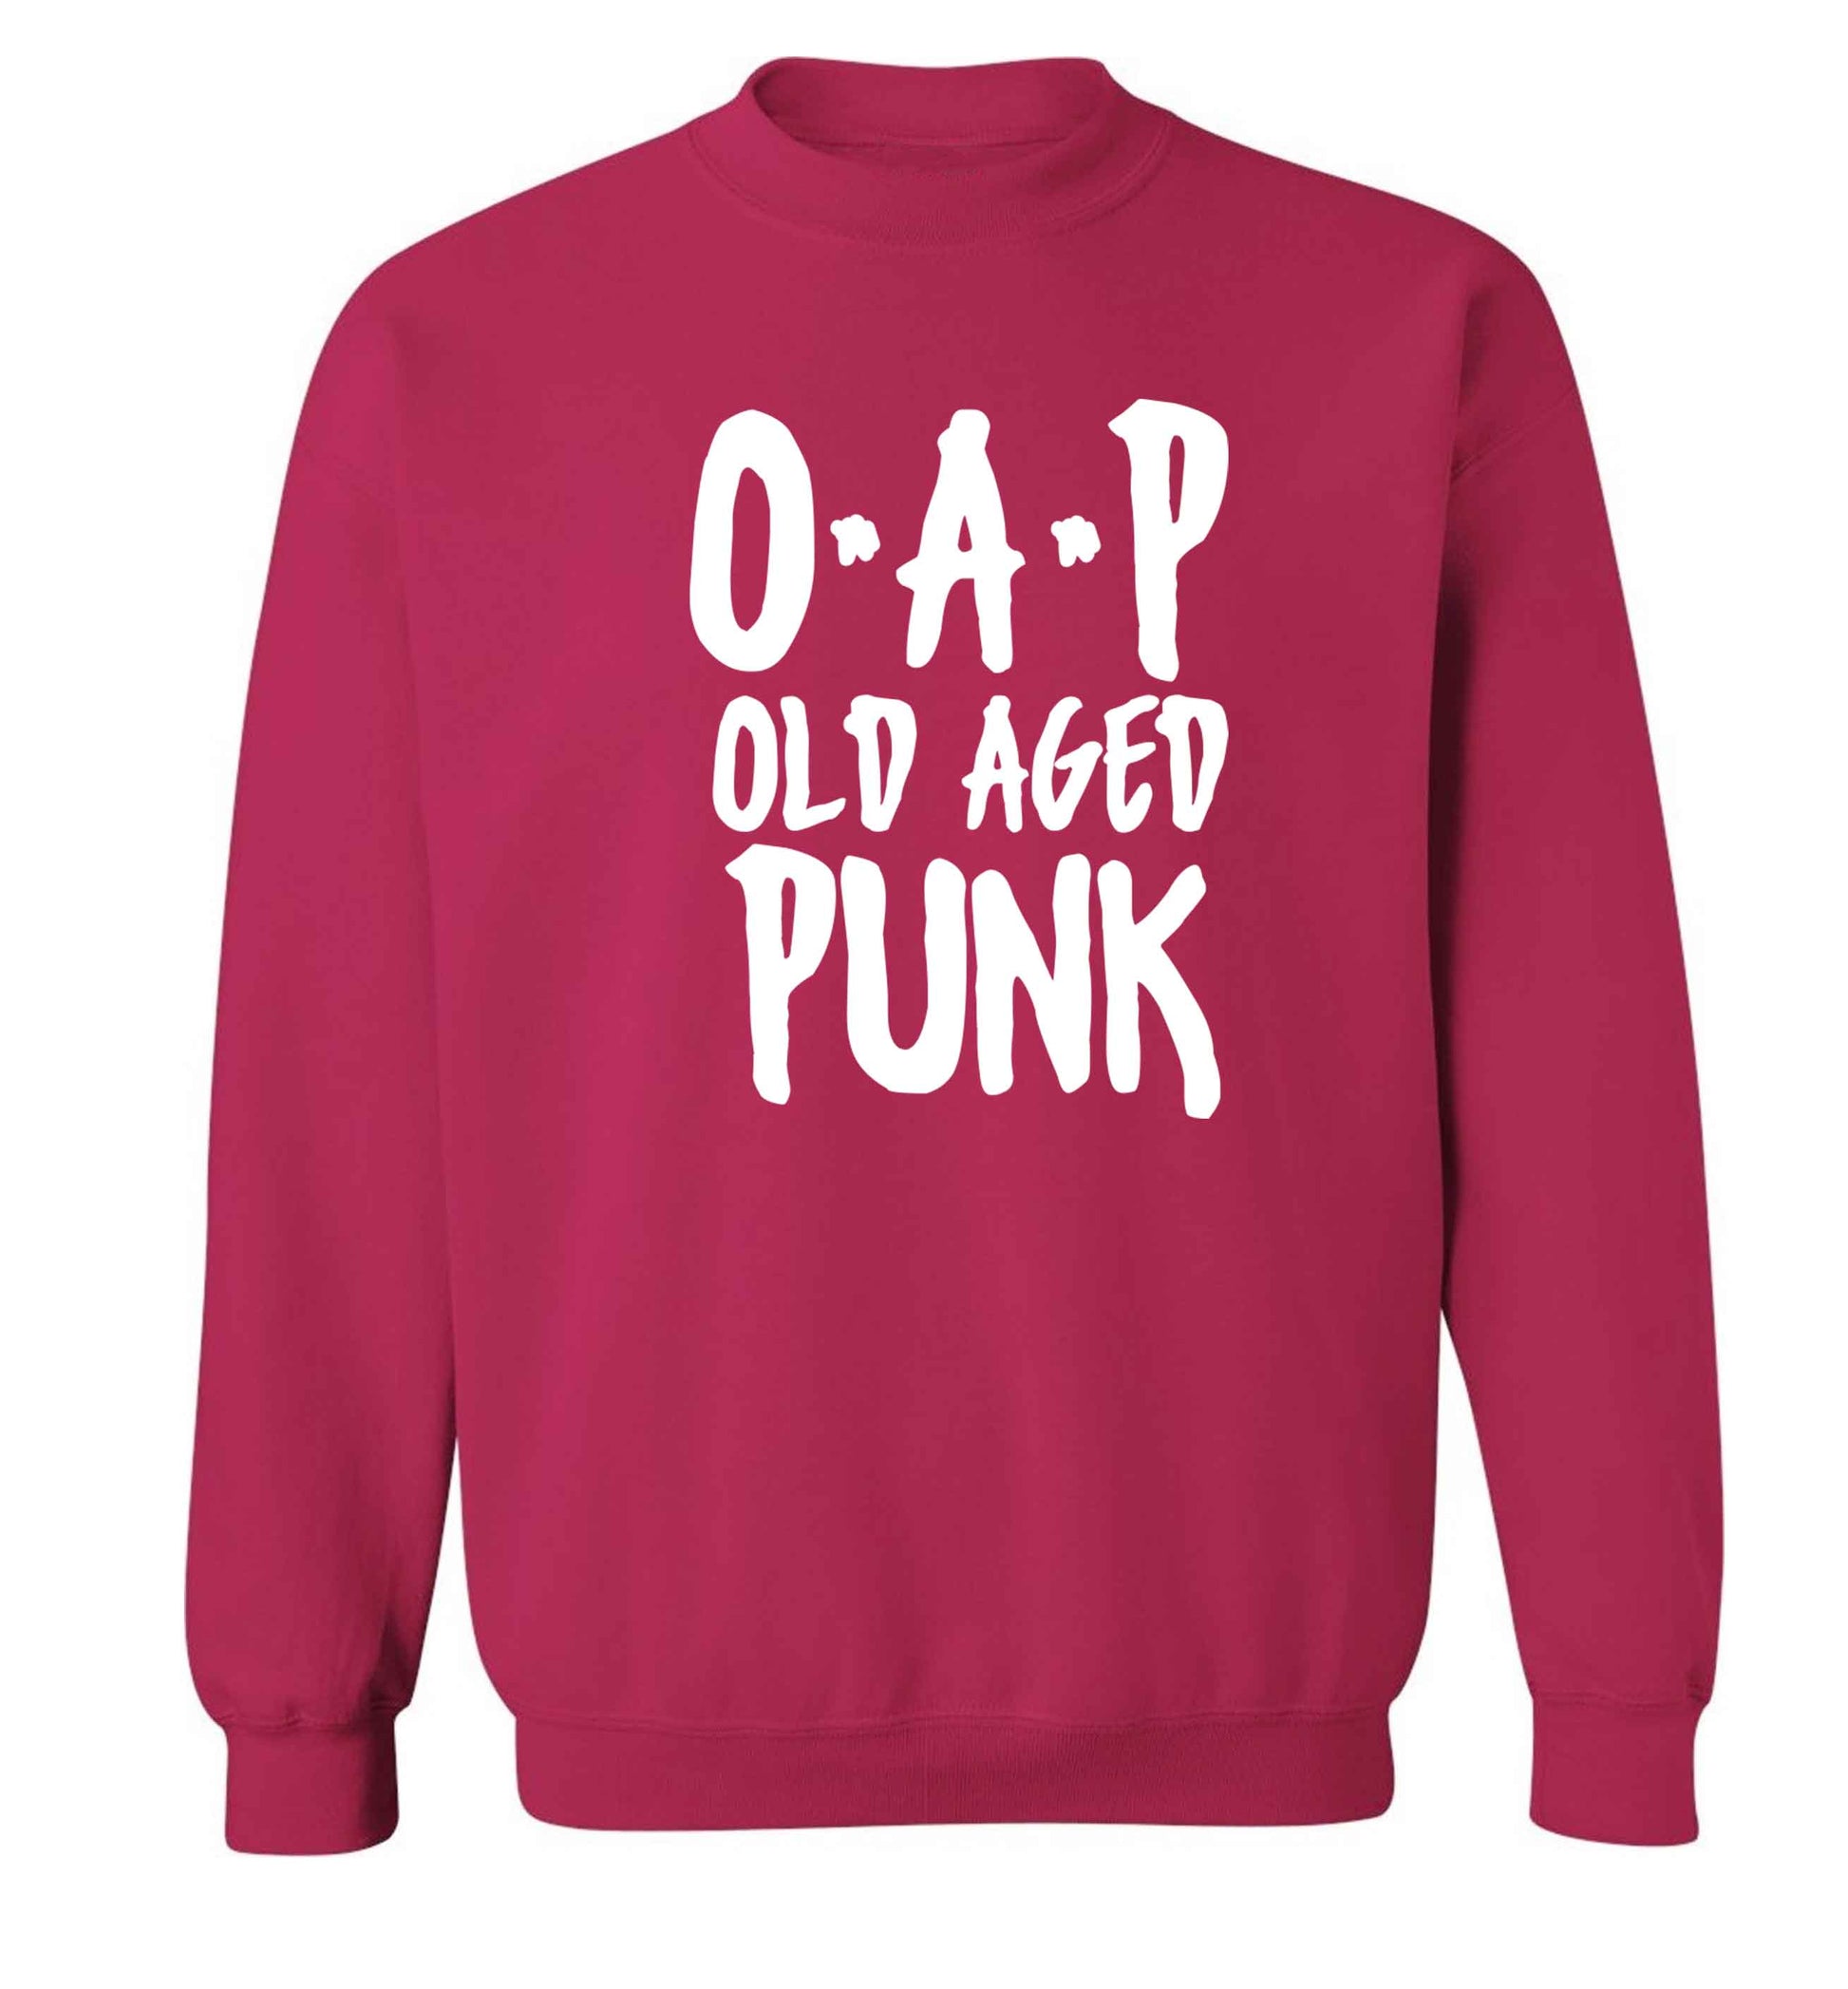 O.A.P Old Age Punk Adult's unisex pink Sweater 2XL